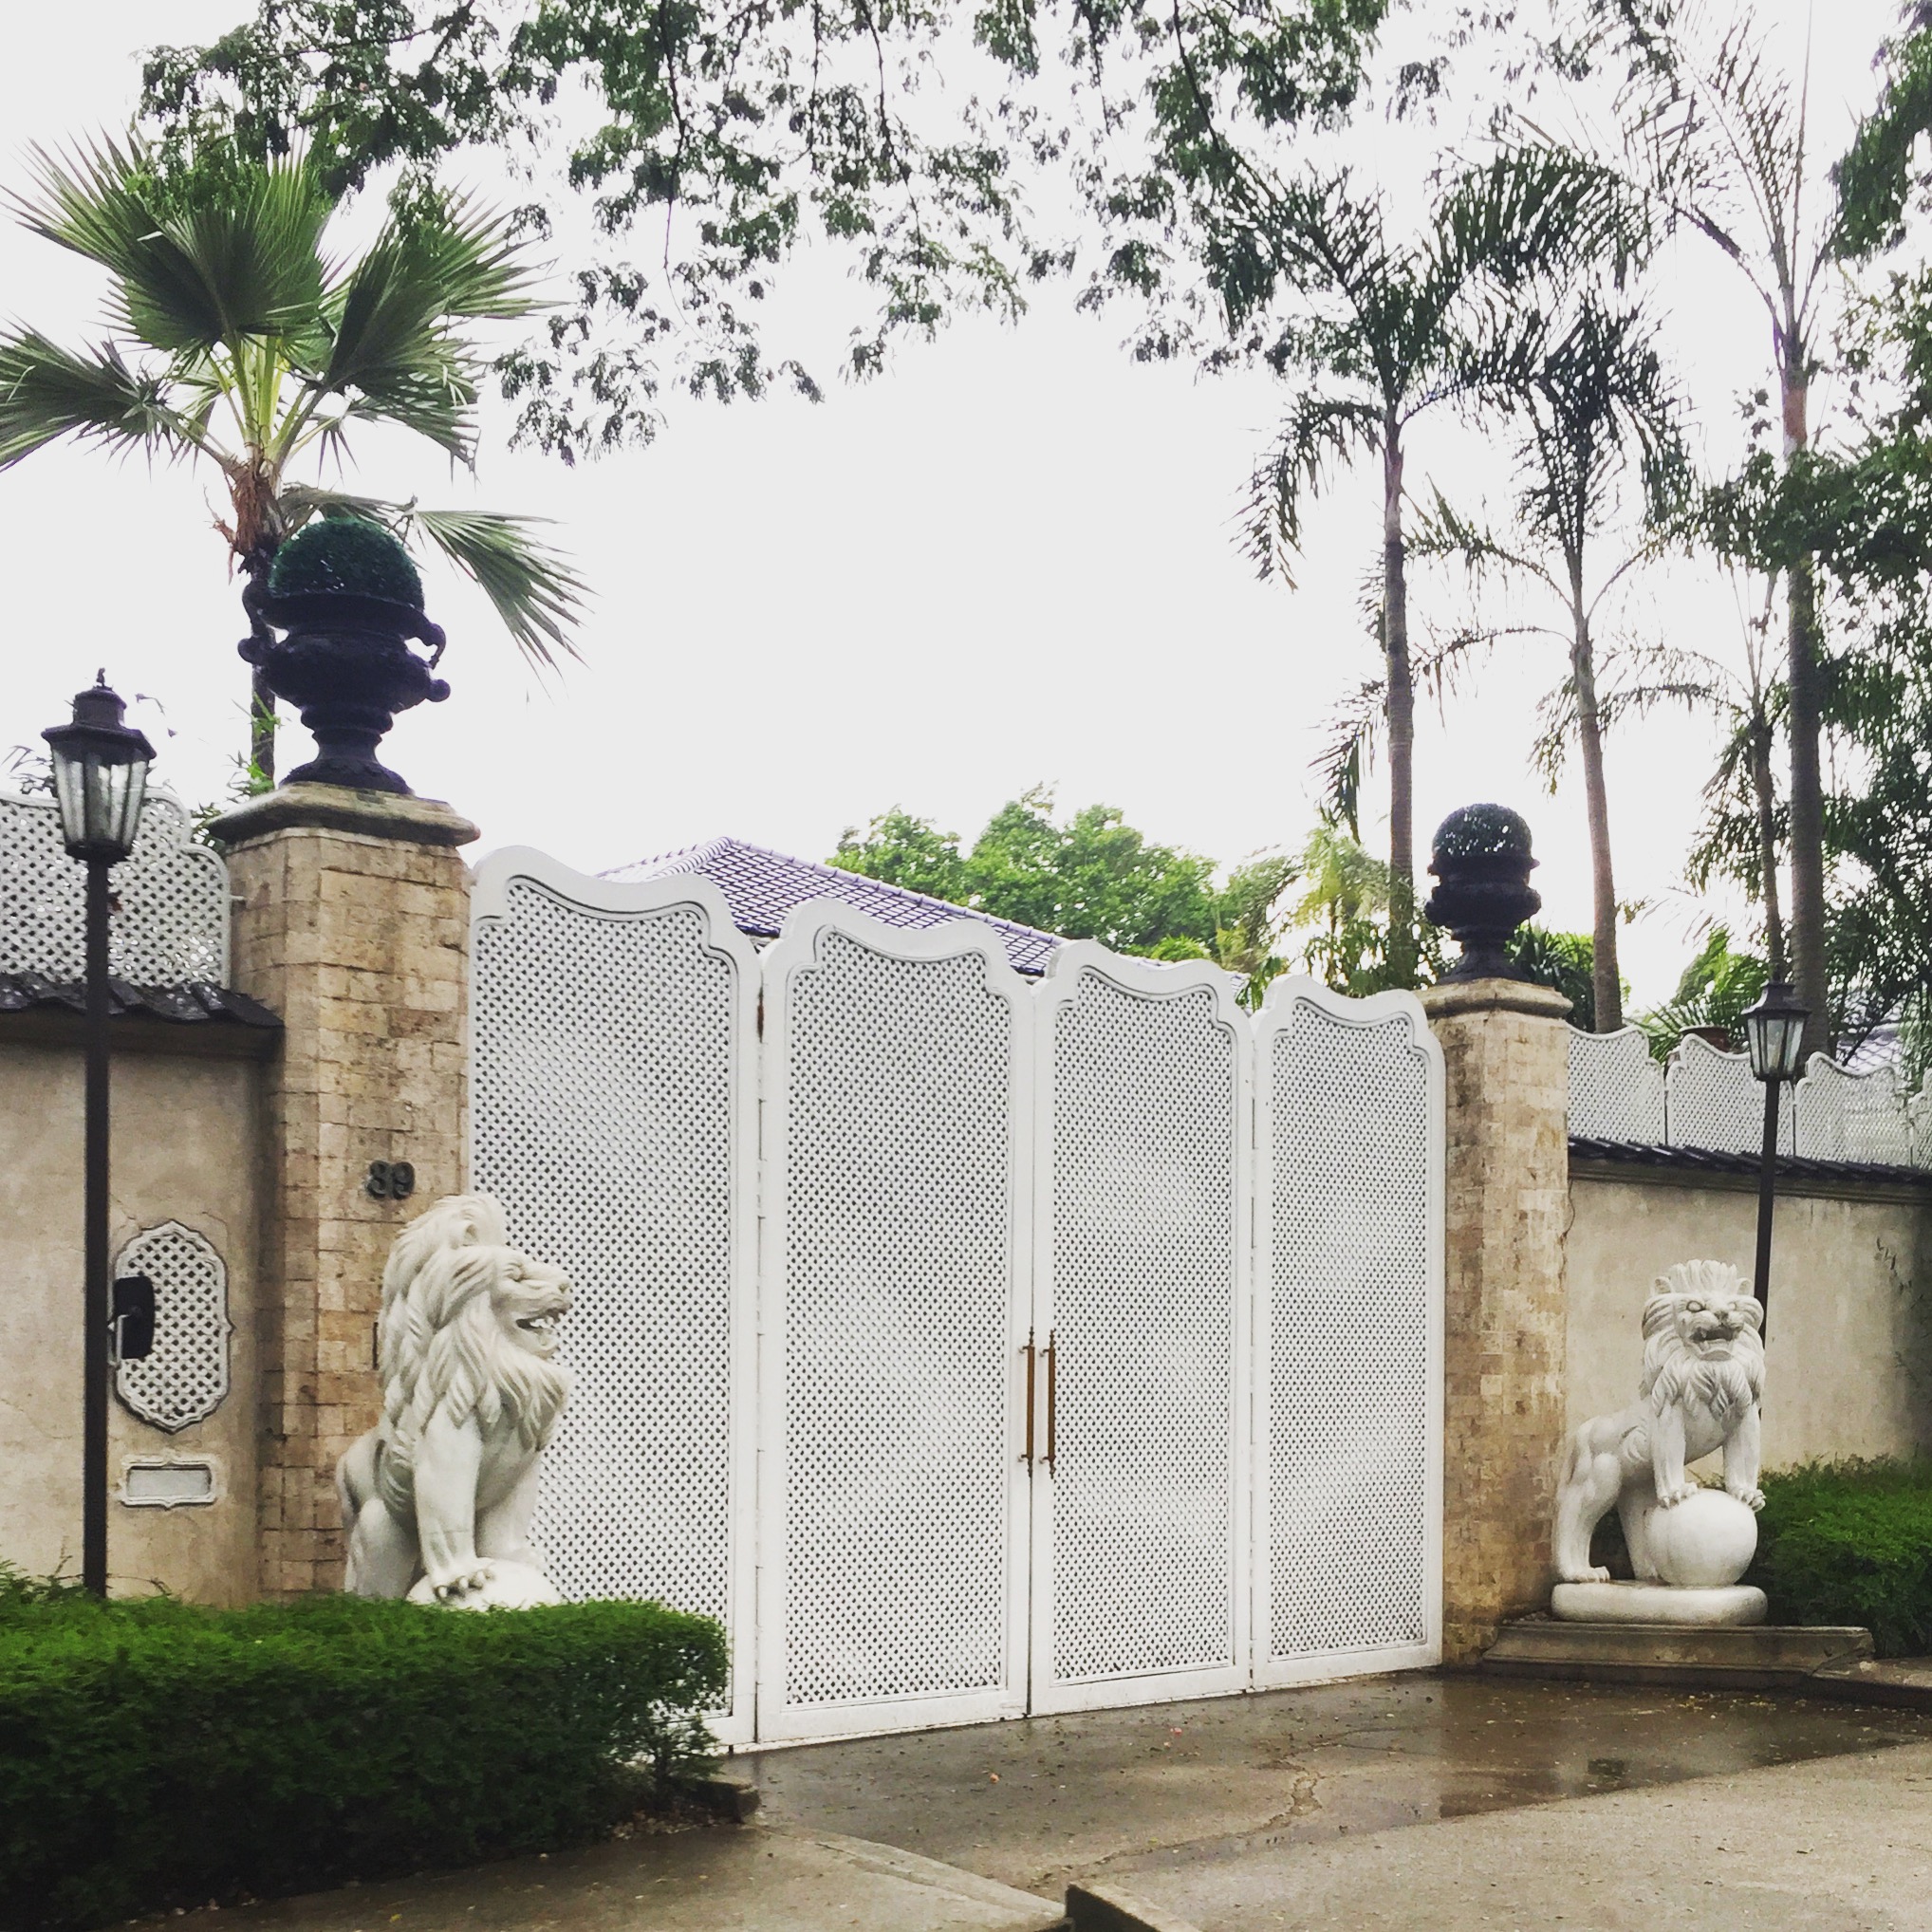 Gated enterance in Manila via The Potted Boxwood